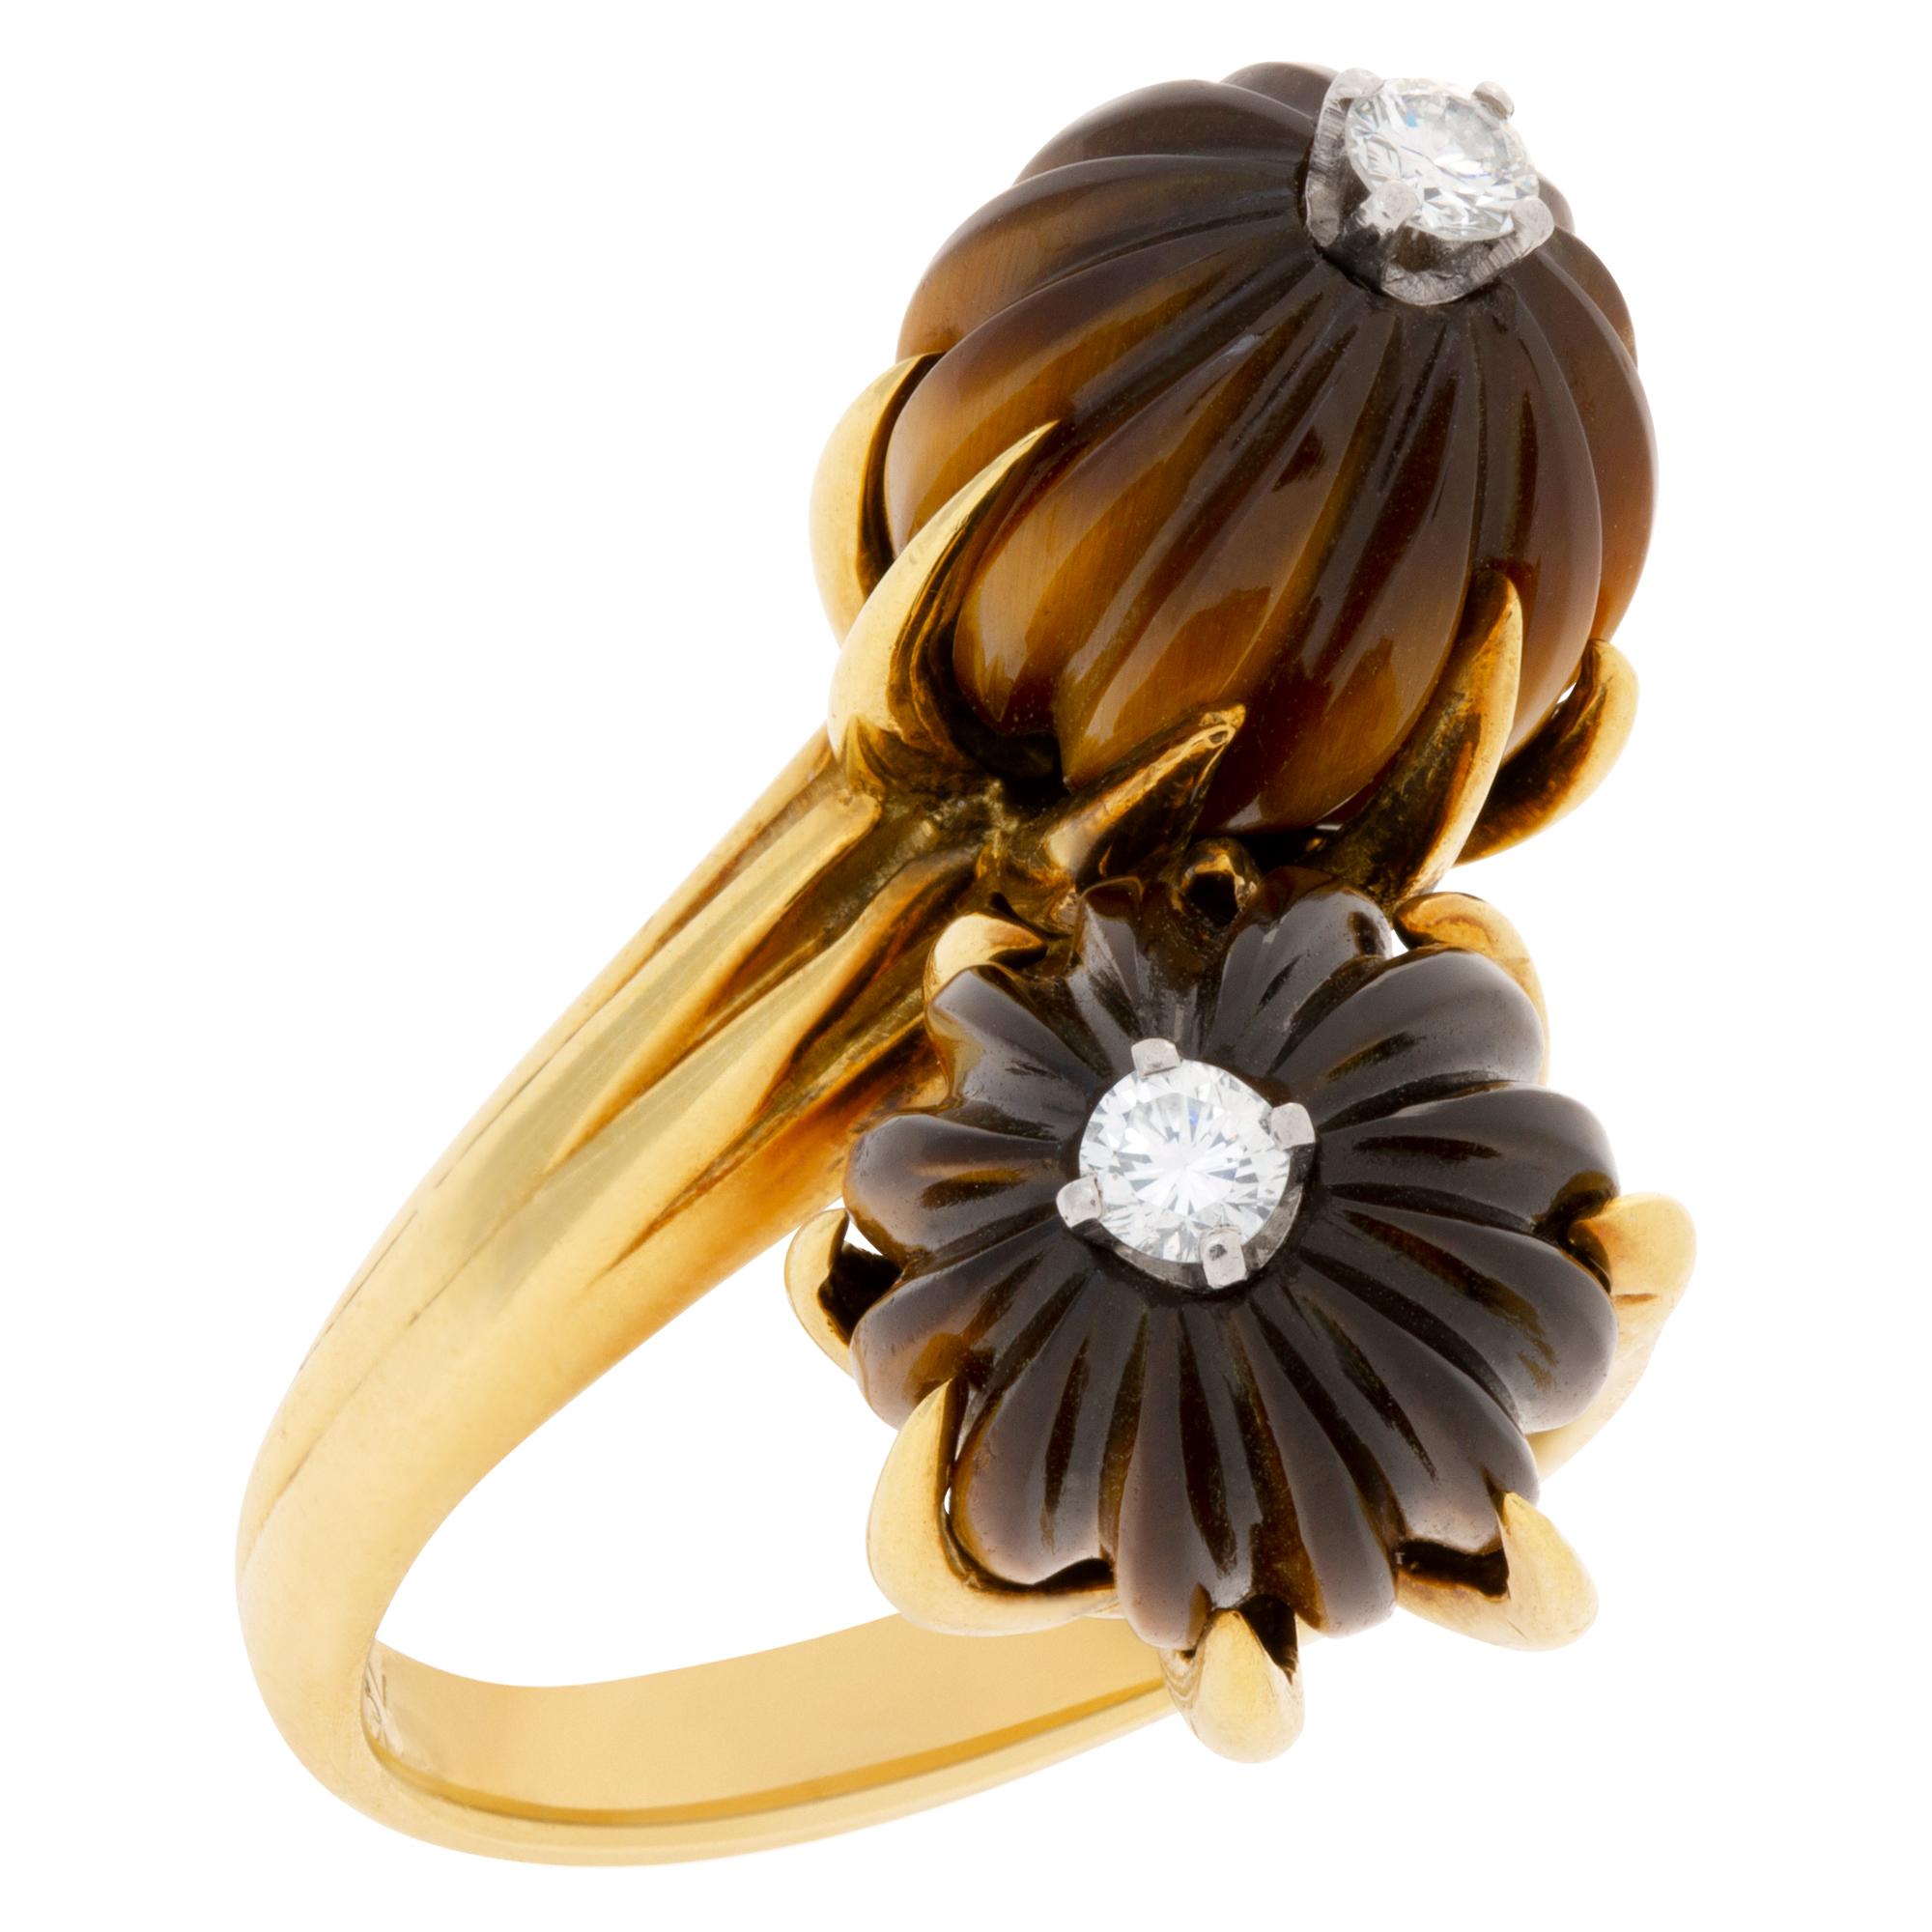 Tiger Eye Ring with Diamond Center in 18k Yellow Gold In Excellent Condition For Sale In Surfside, FL